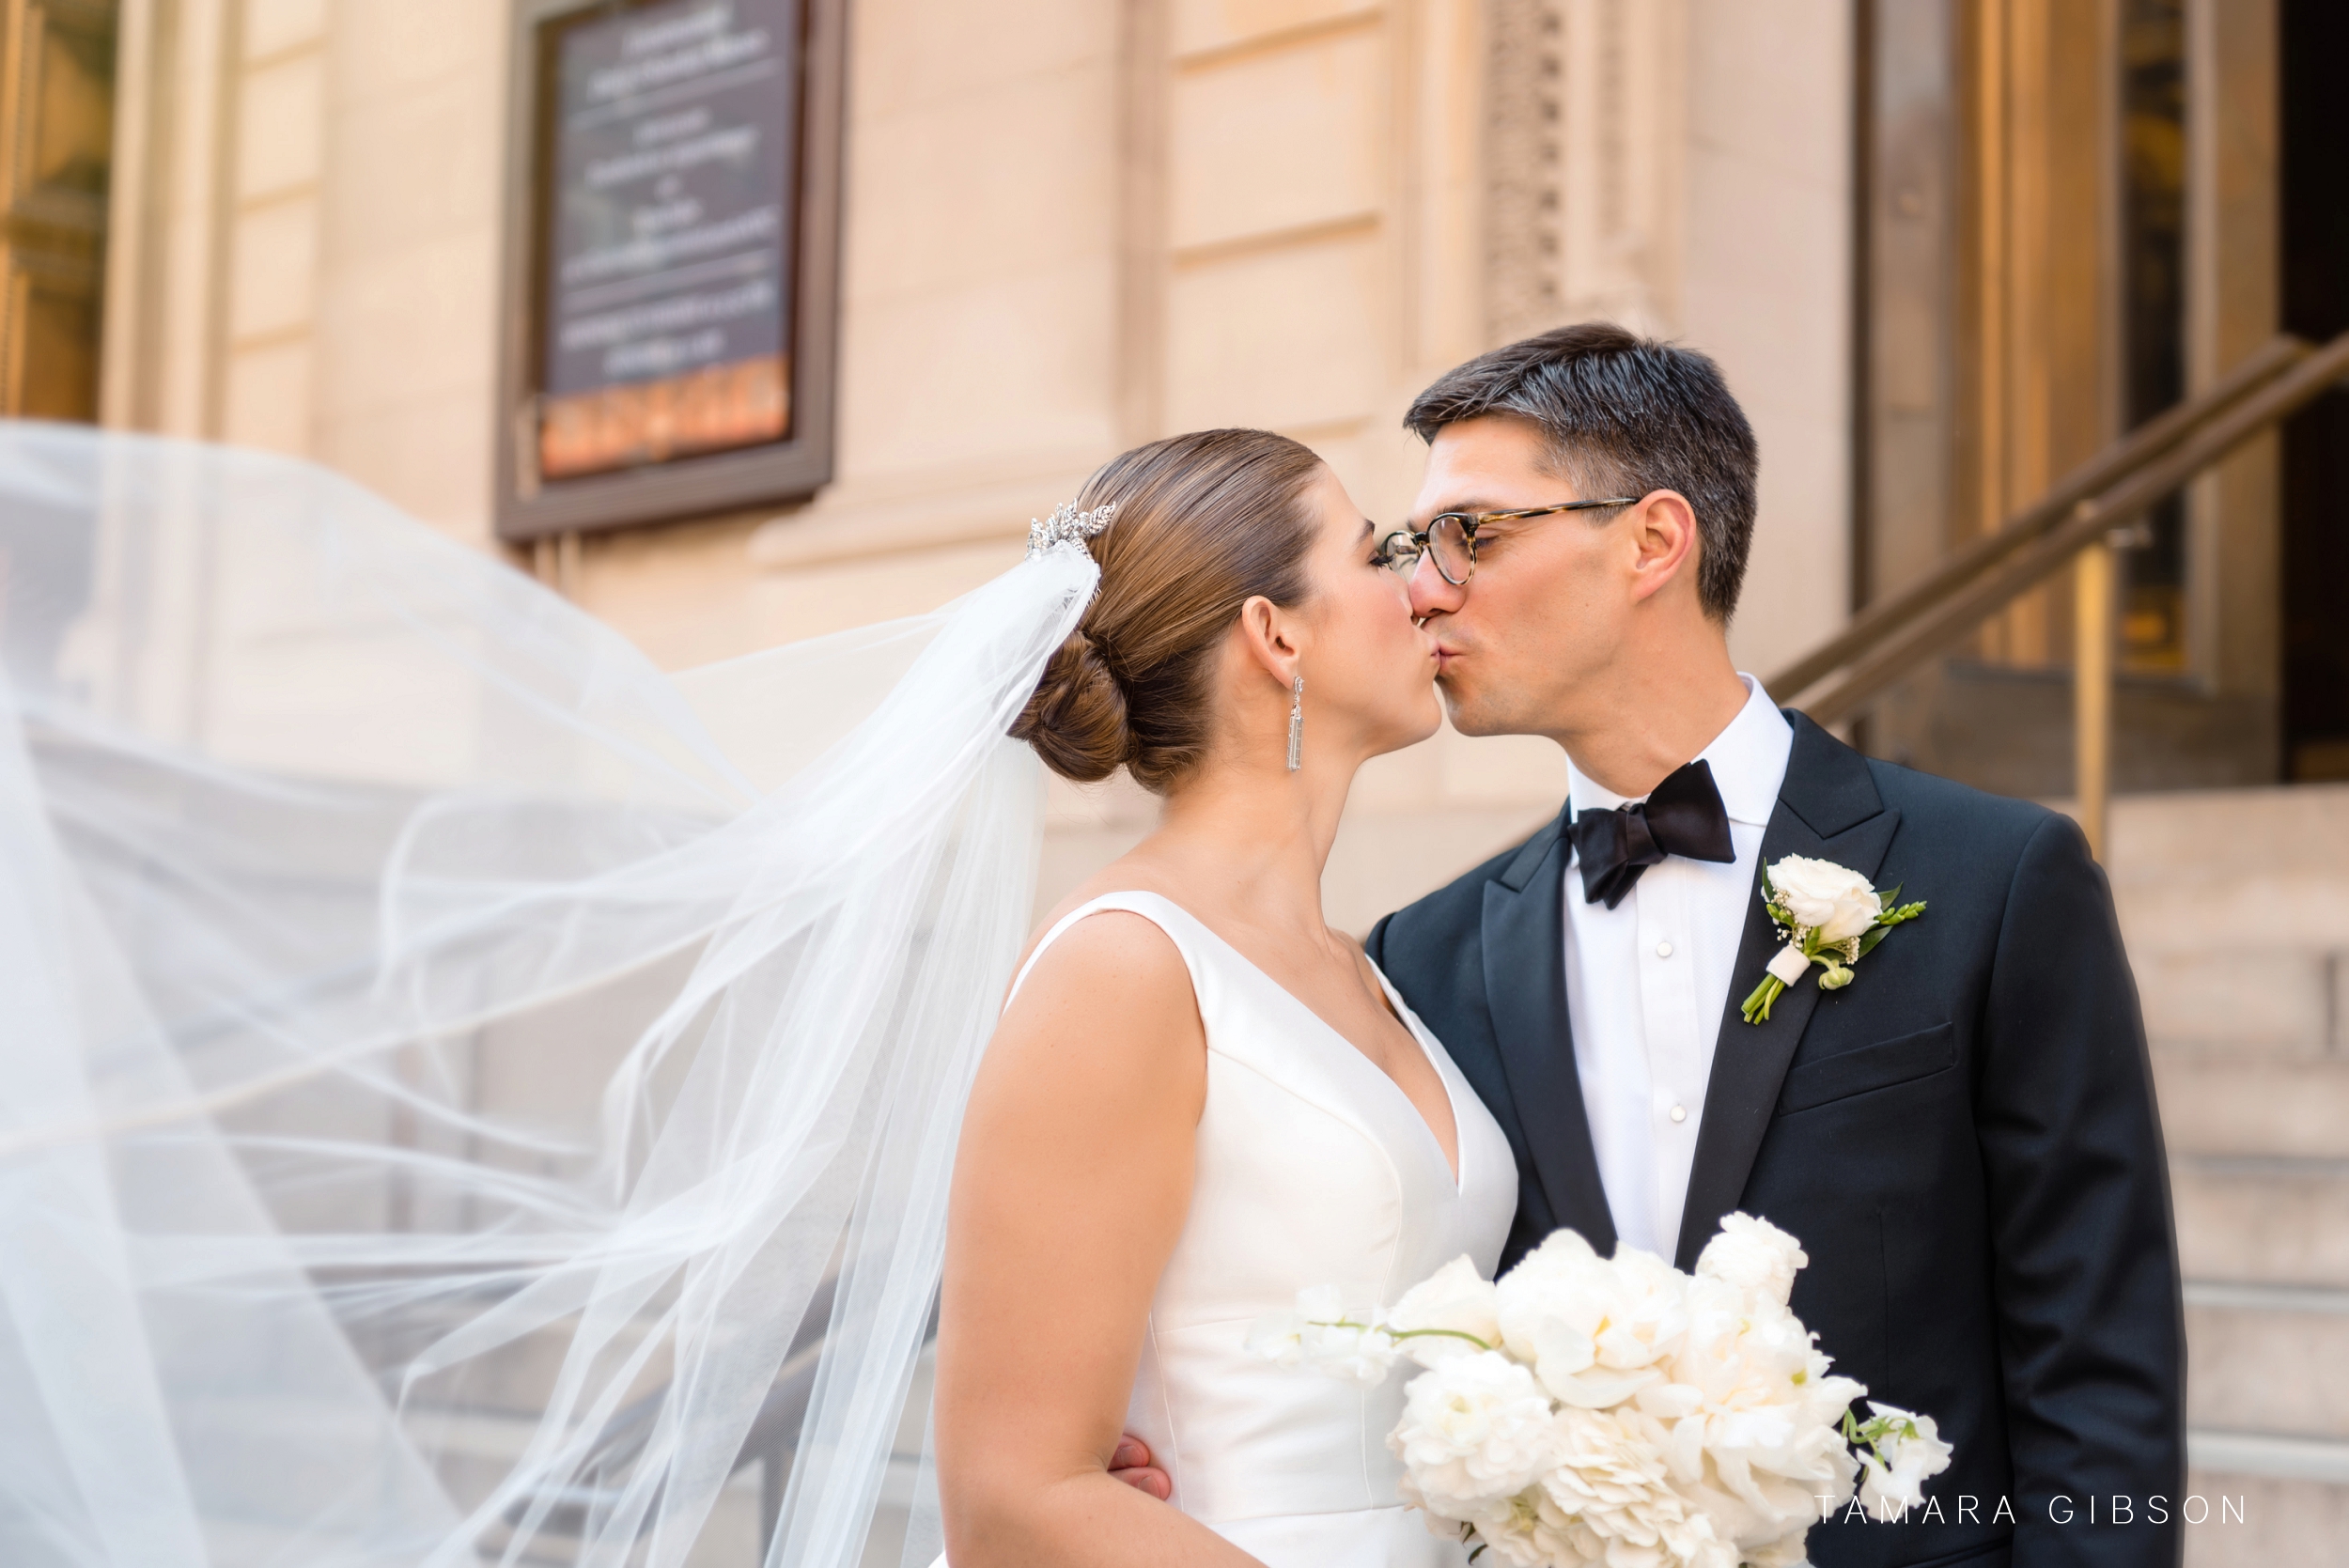 Thomas and Victoria outside St. Ignatius of Loyola Church during NYC Wedding